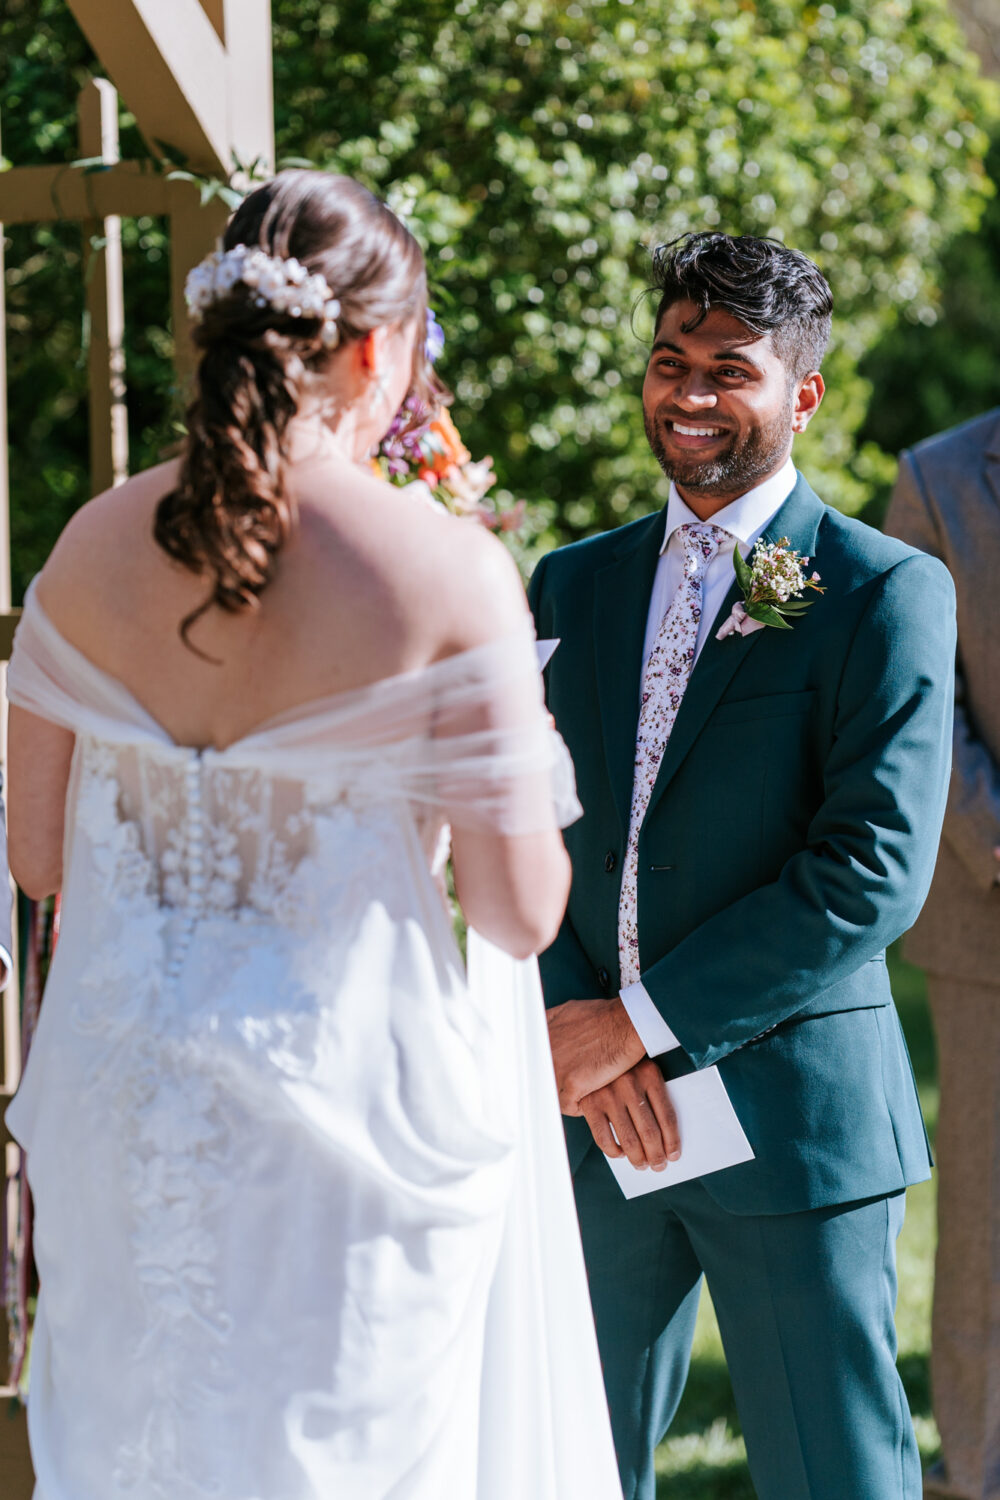 groom smiling while bride reads her vows